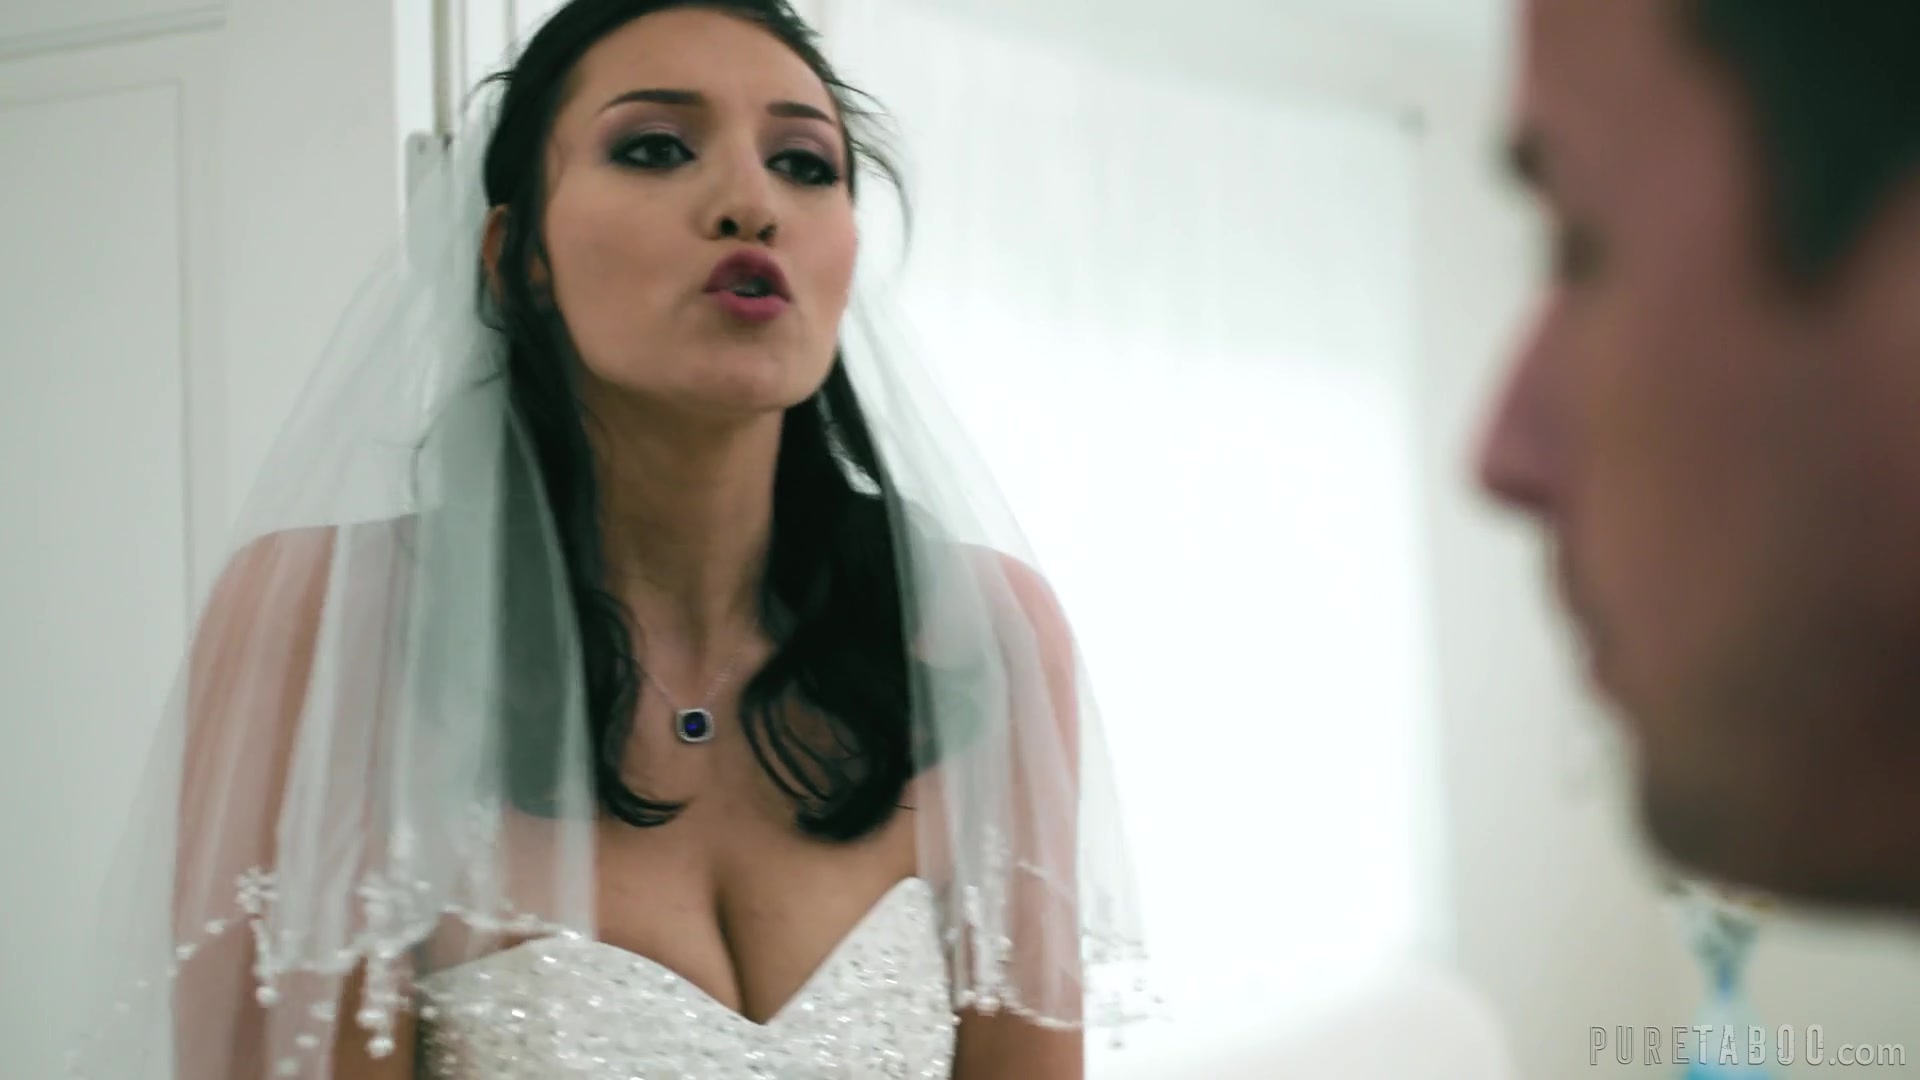 Filthy bride Bella Rolland gets banged on the wedding picture